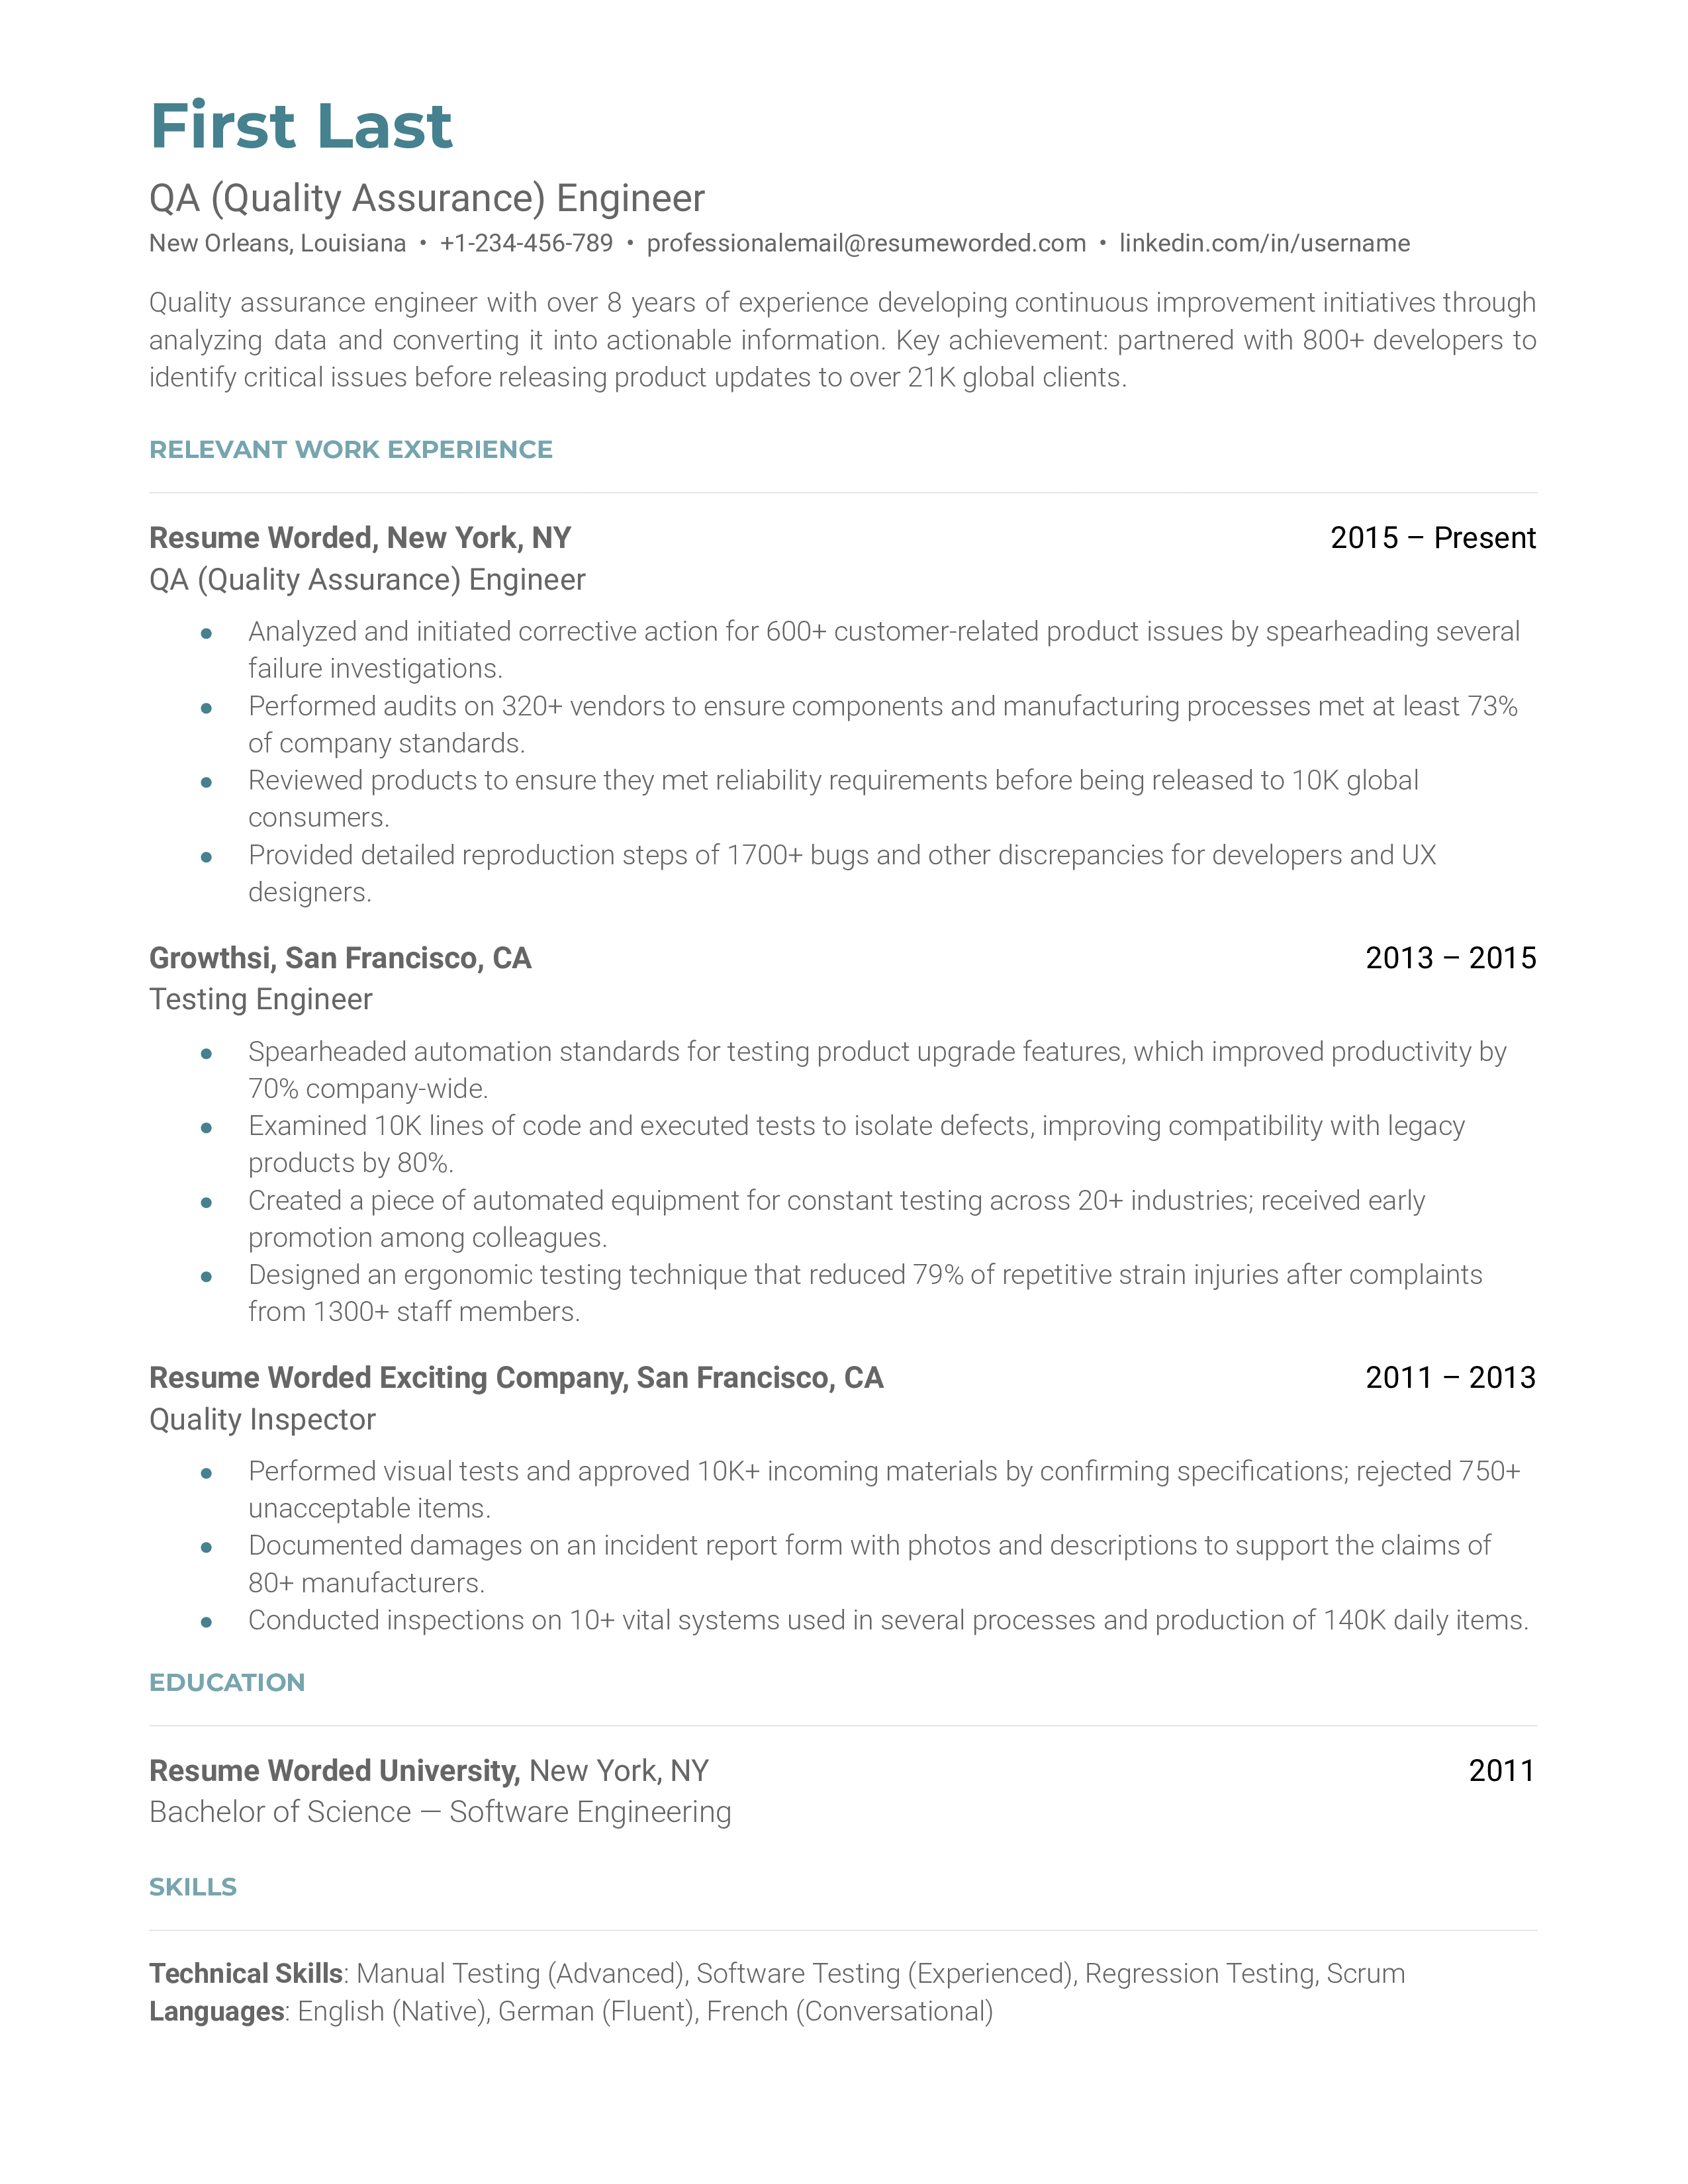 A resume for a QA engineer with a master's degree in computer engineering and prior experience as a lead QA engineer.